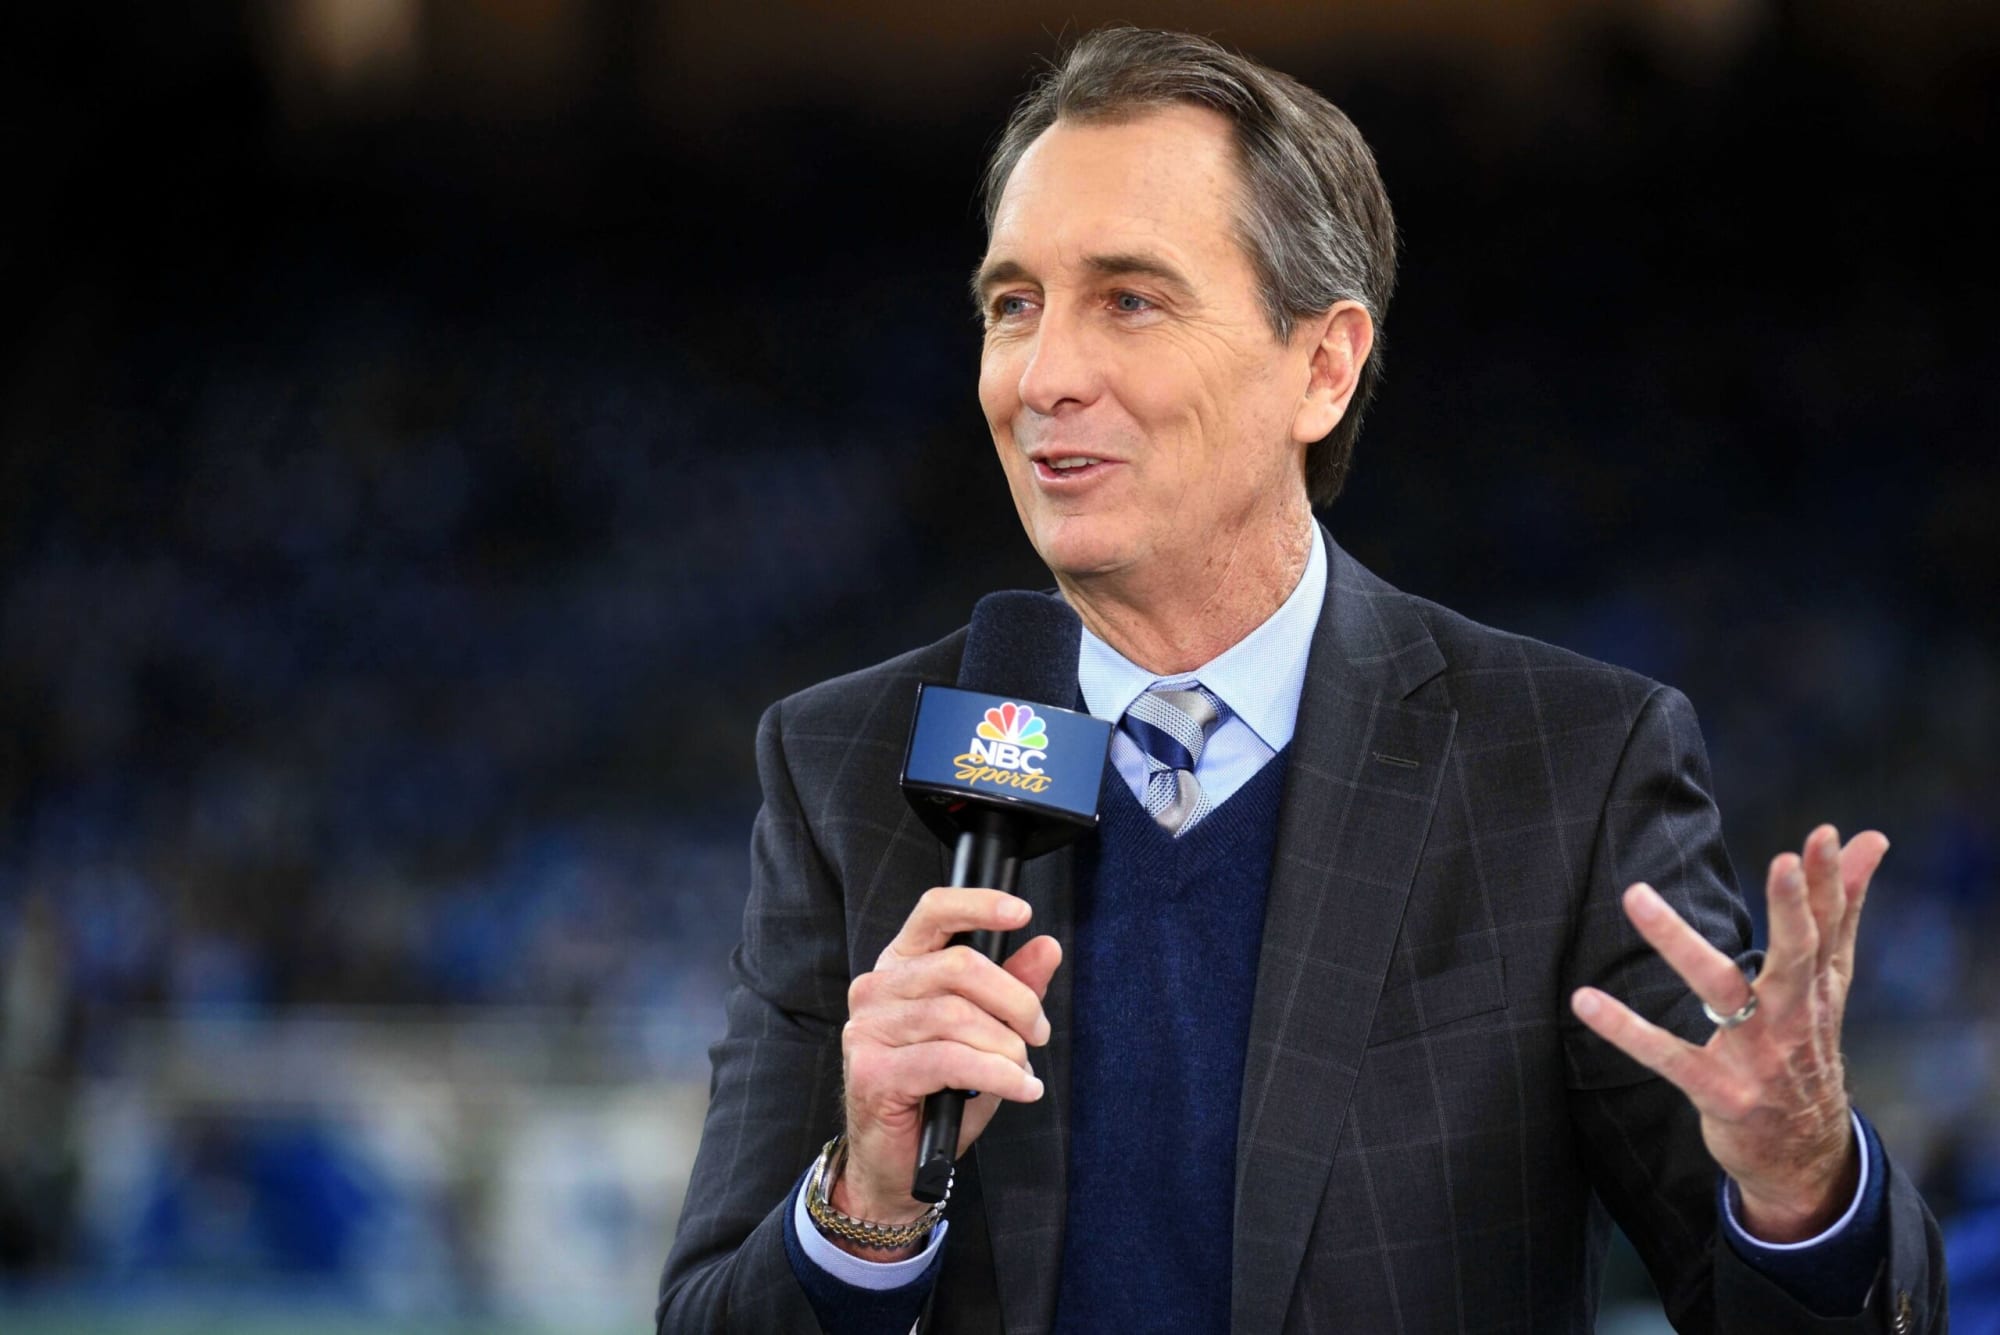 Cris Collinsworth has the worst possible draft idea for the Chiefs